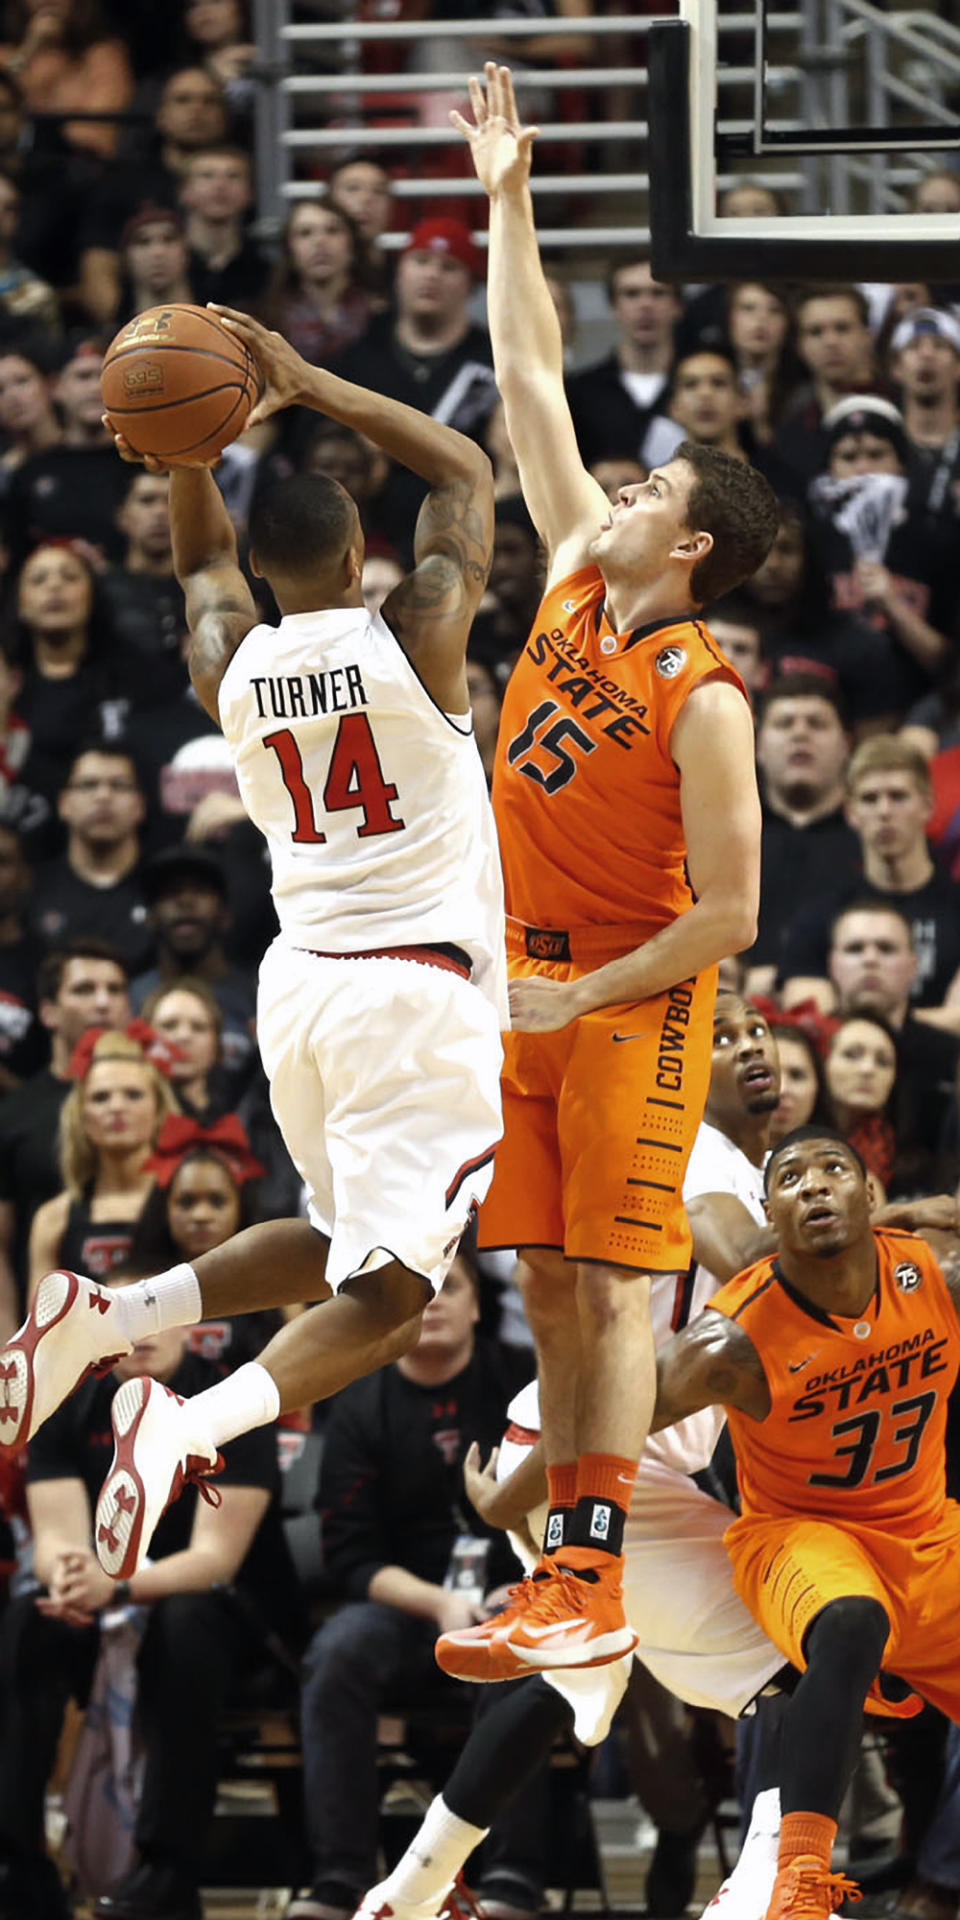 Texas Tech's Robert Turner (14) tries to drive past Oklahoma State's Christien Sager (15) during their NCAA college basketball game in Lubbock, Texas, Saturday, Feb, 8, 2014. (AP Photo/Lubbock Avalanche-Journal, Tori Eichberger) ALL LOCAL TV OUT